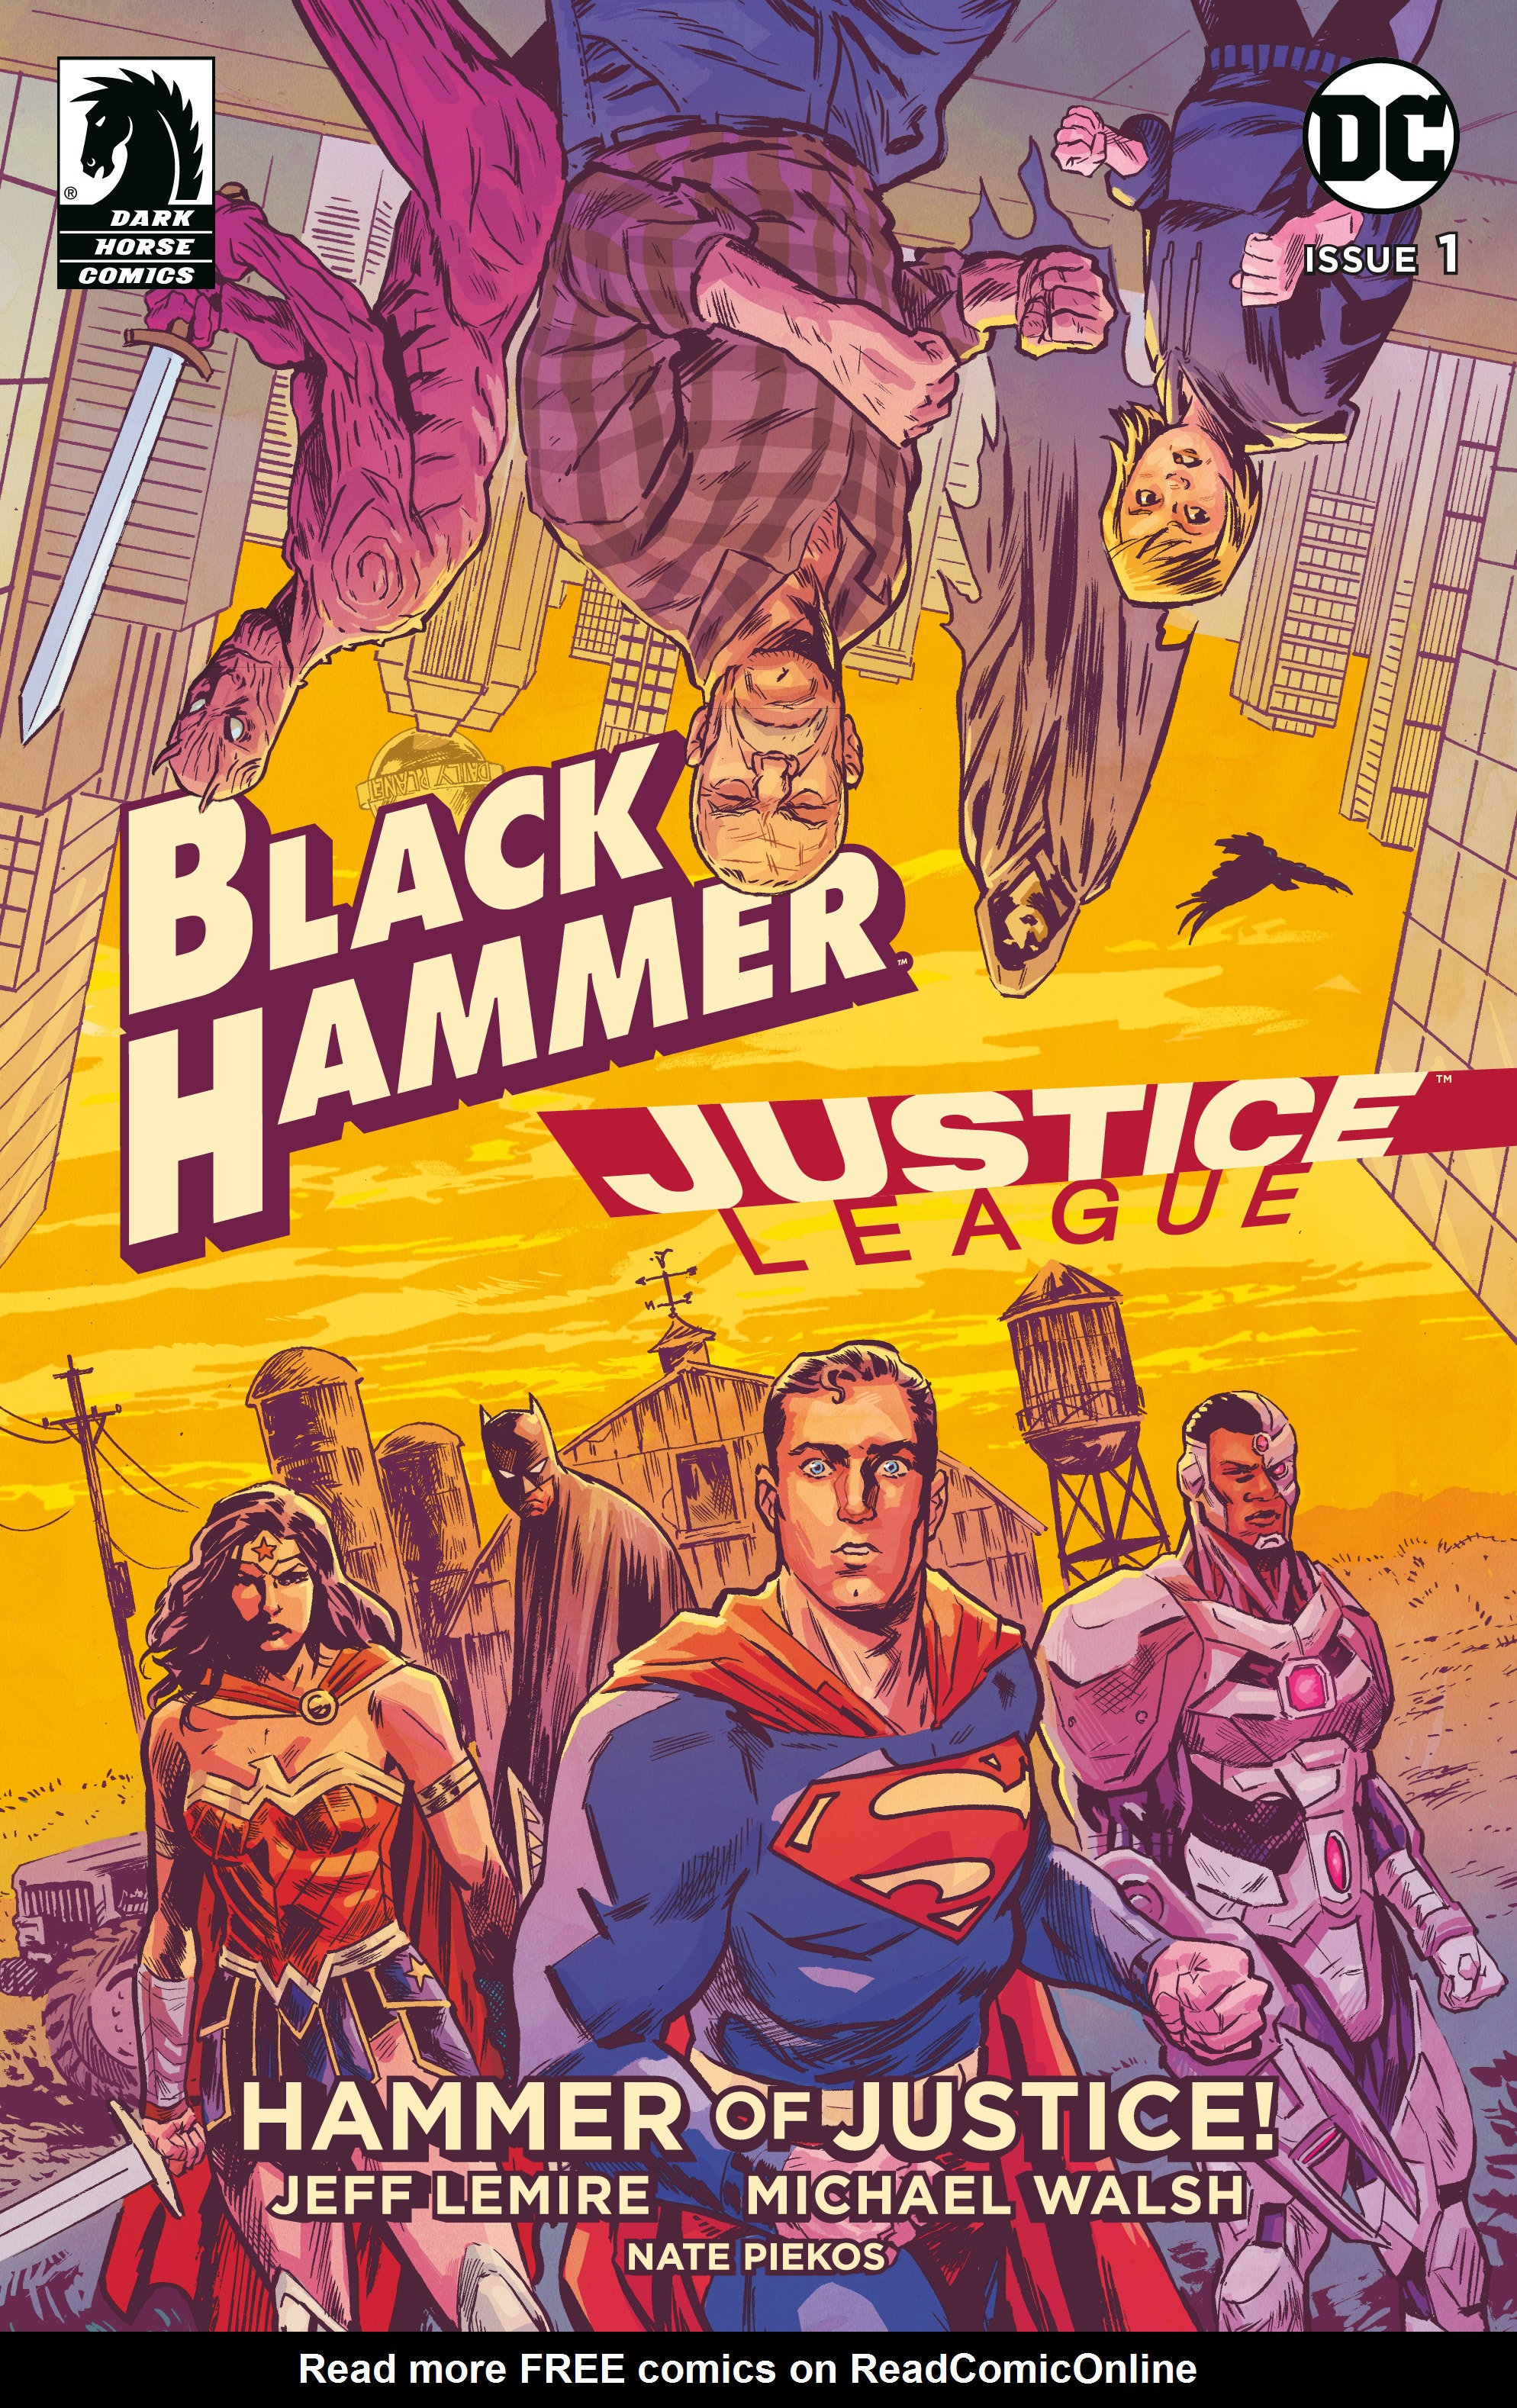 Read online Black Hammer/Justice League: Hammer of Justice! comic -  Issue #1 - 1